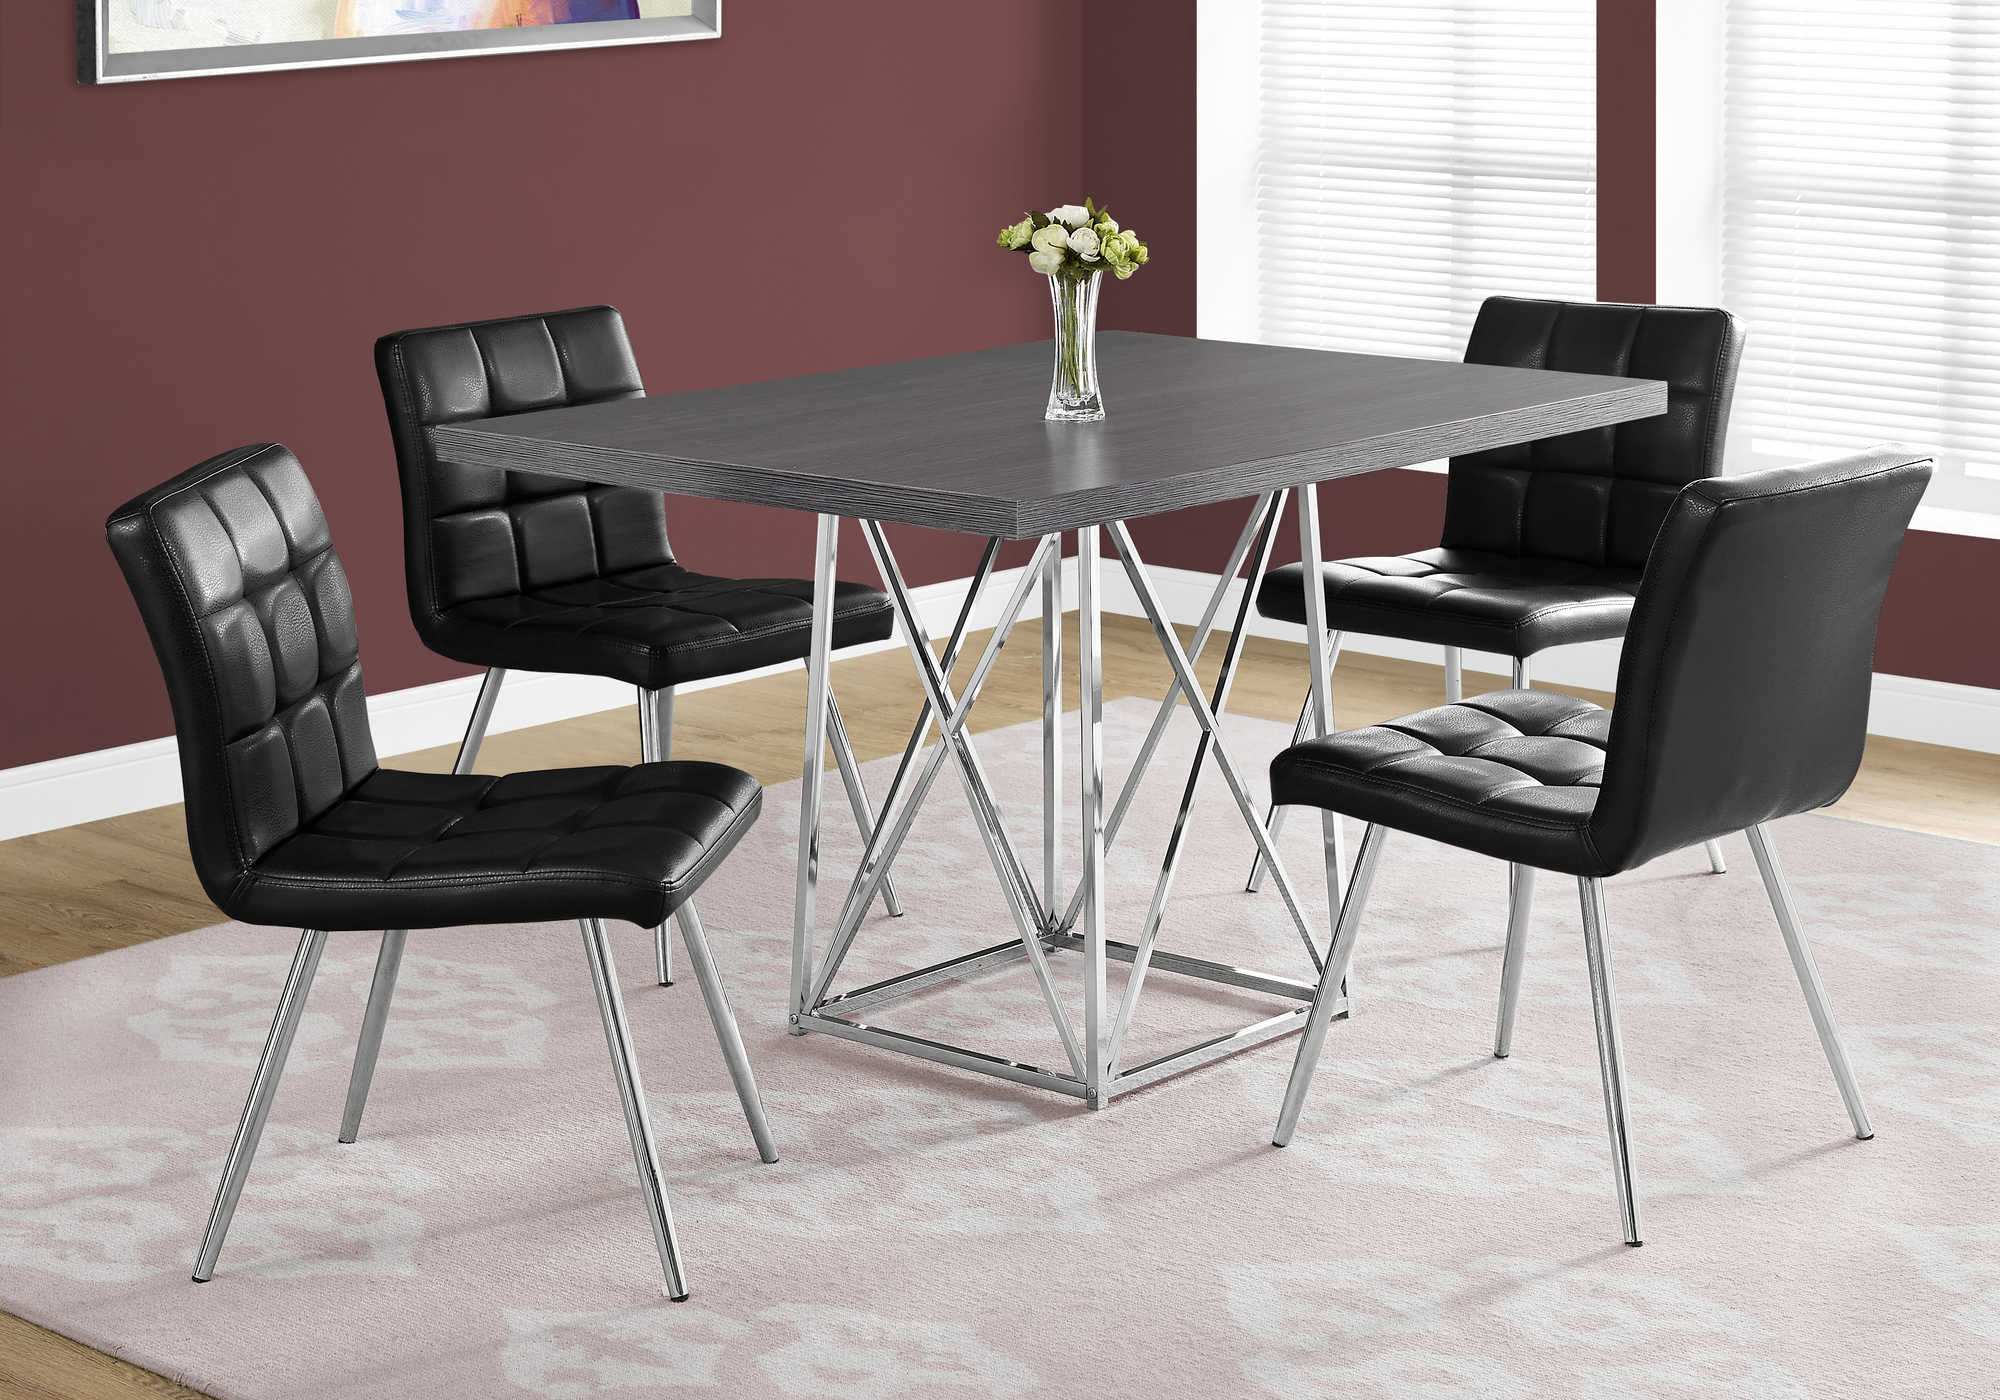 DINING CHAIR - 2PCS / 32"H / BLACK LEATHER-LOOK / CHROME 